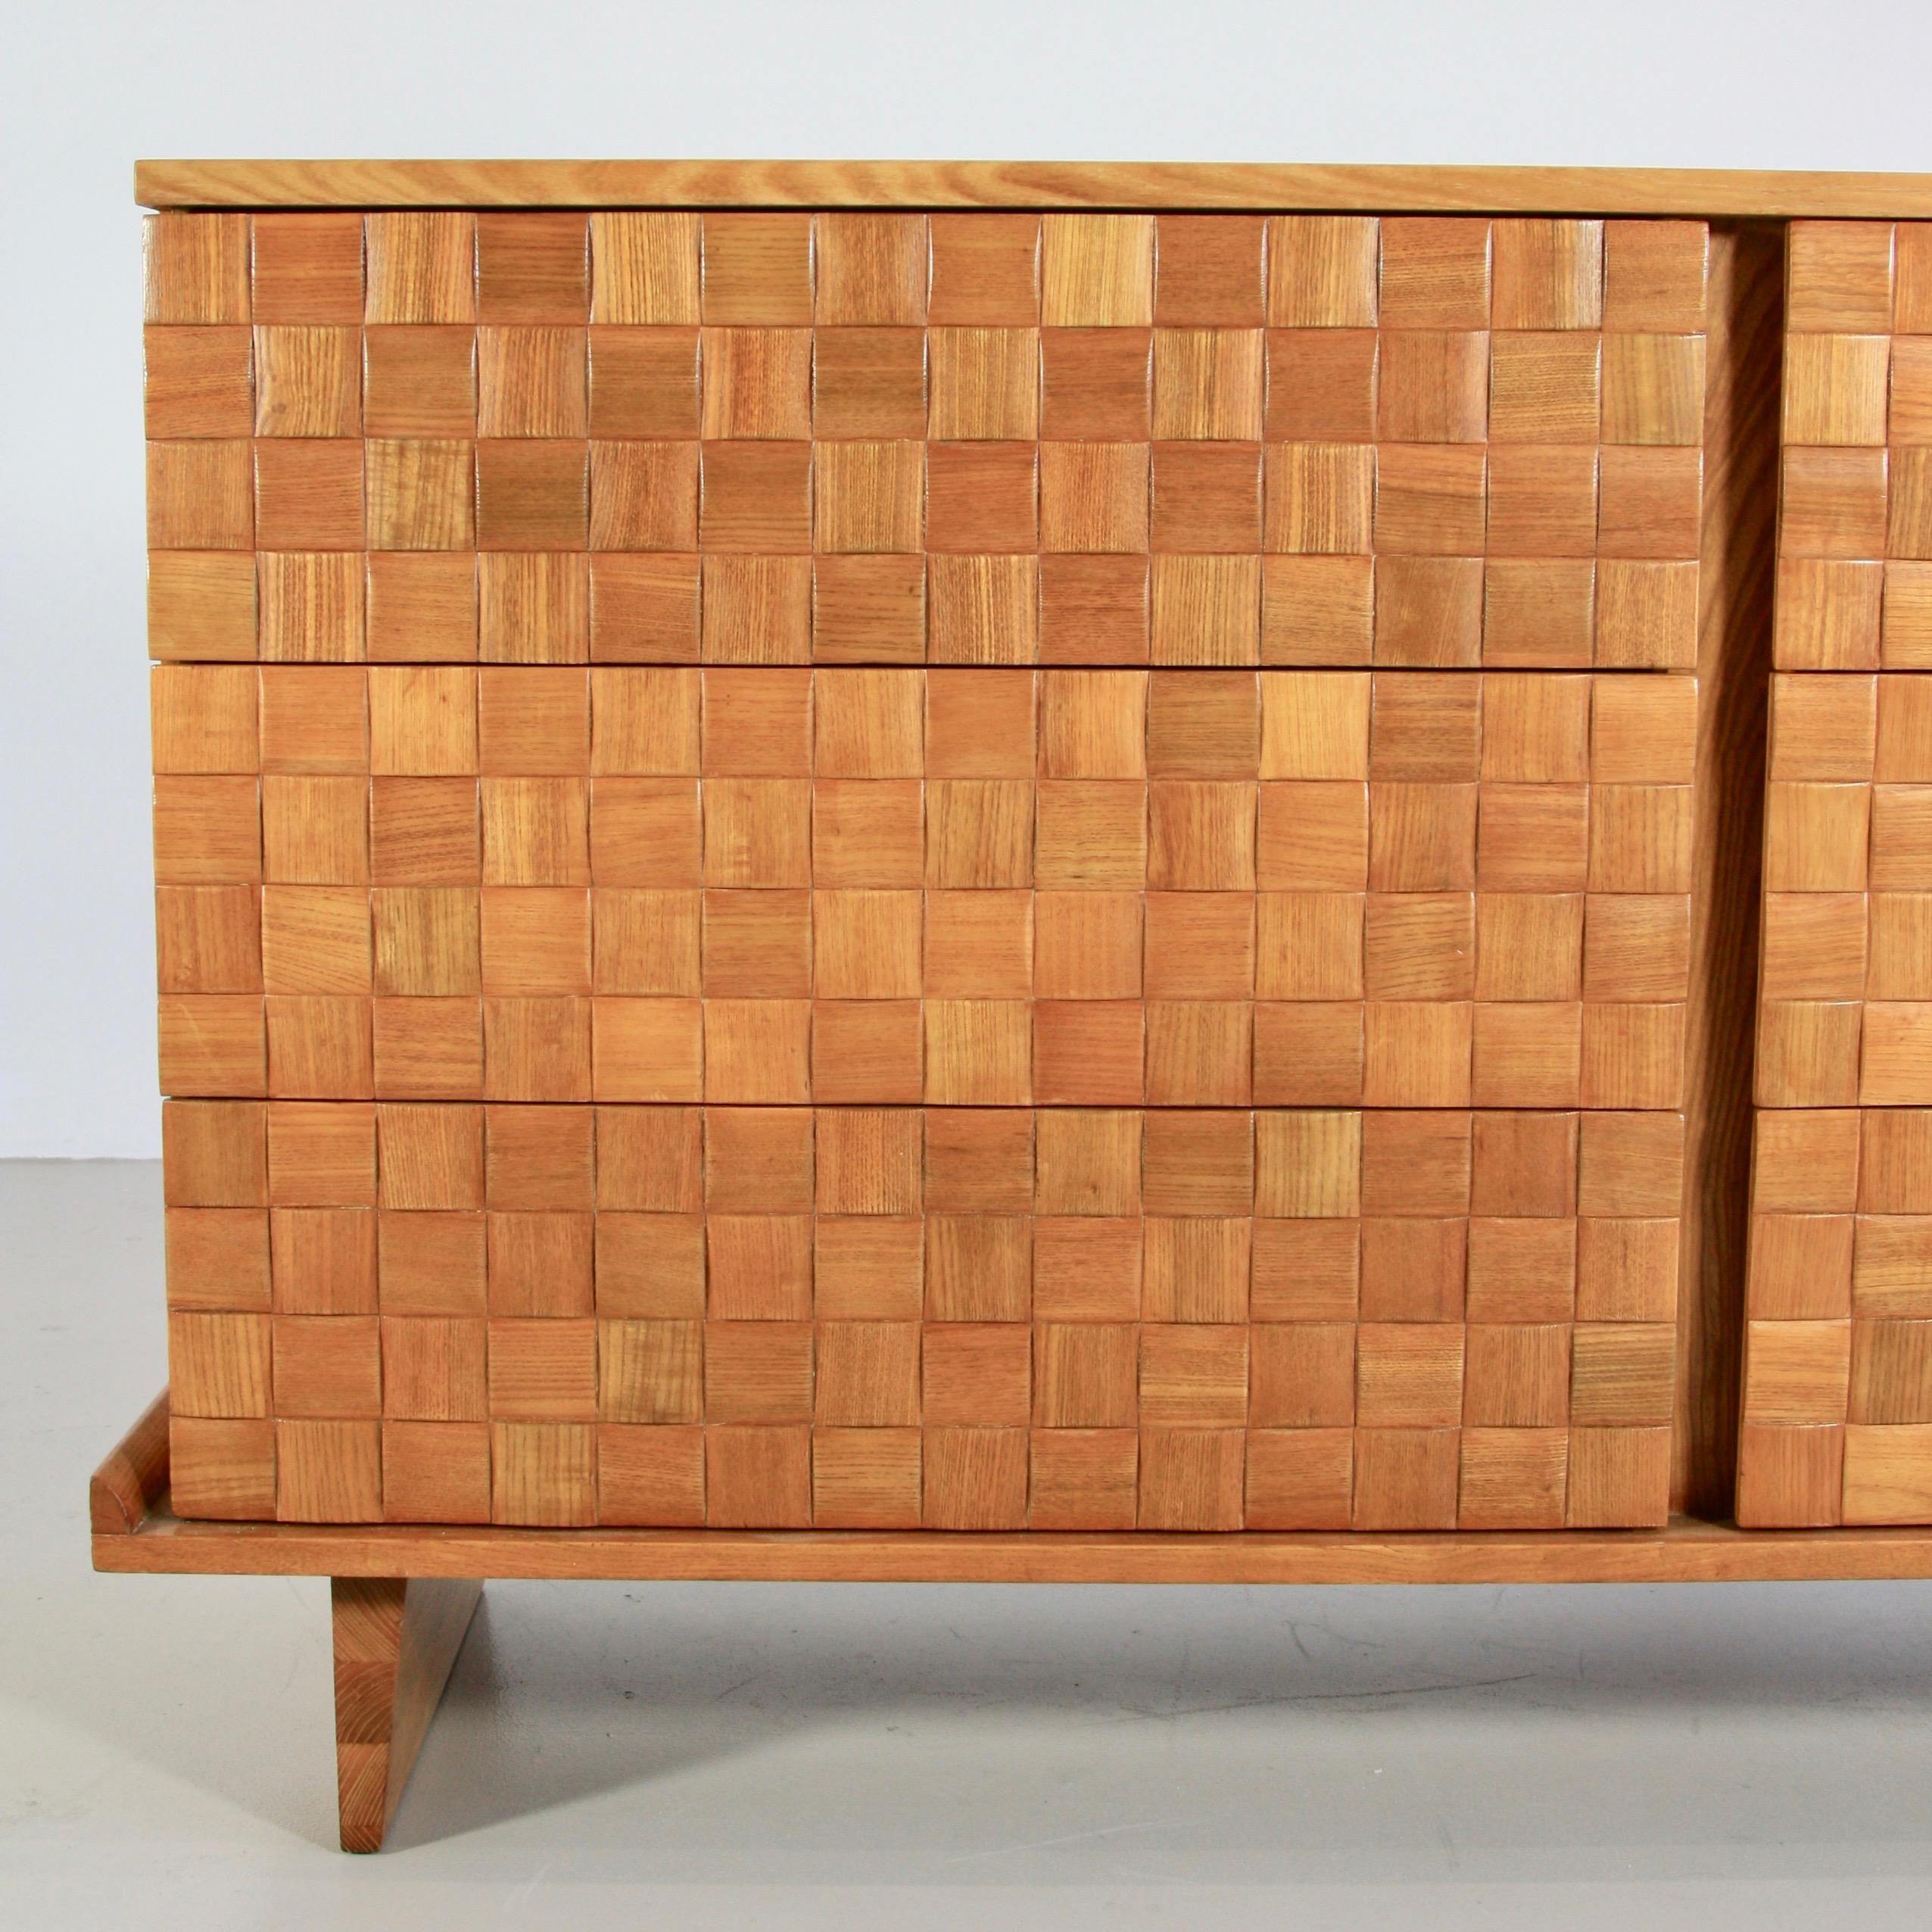 Chest of drawers designed by Paul Laszlo. USA, Brown & Saltman, 1955.

Elegant six-drawer chest made of ashwood, using the Laszlo typical basket weave design on the drawer fronts. One of the drawers is labelled with the manufacturer's label 'Brown